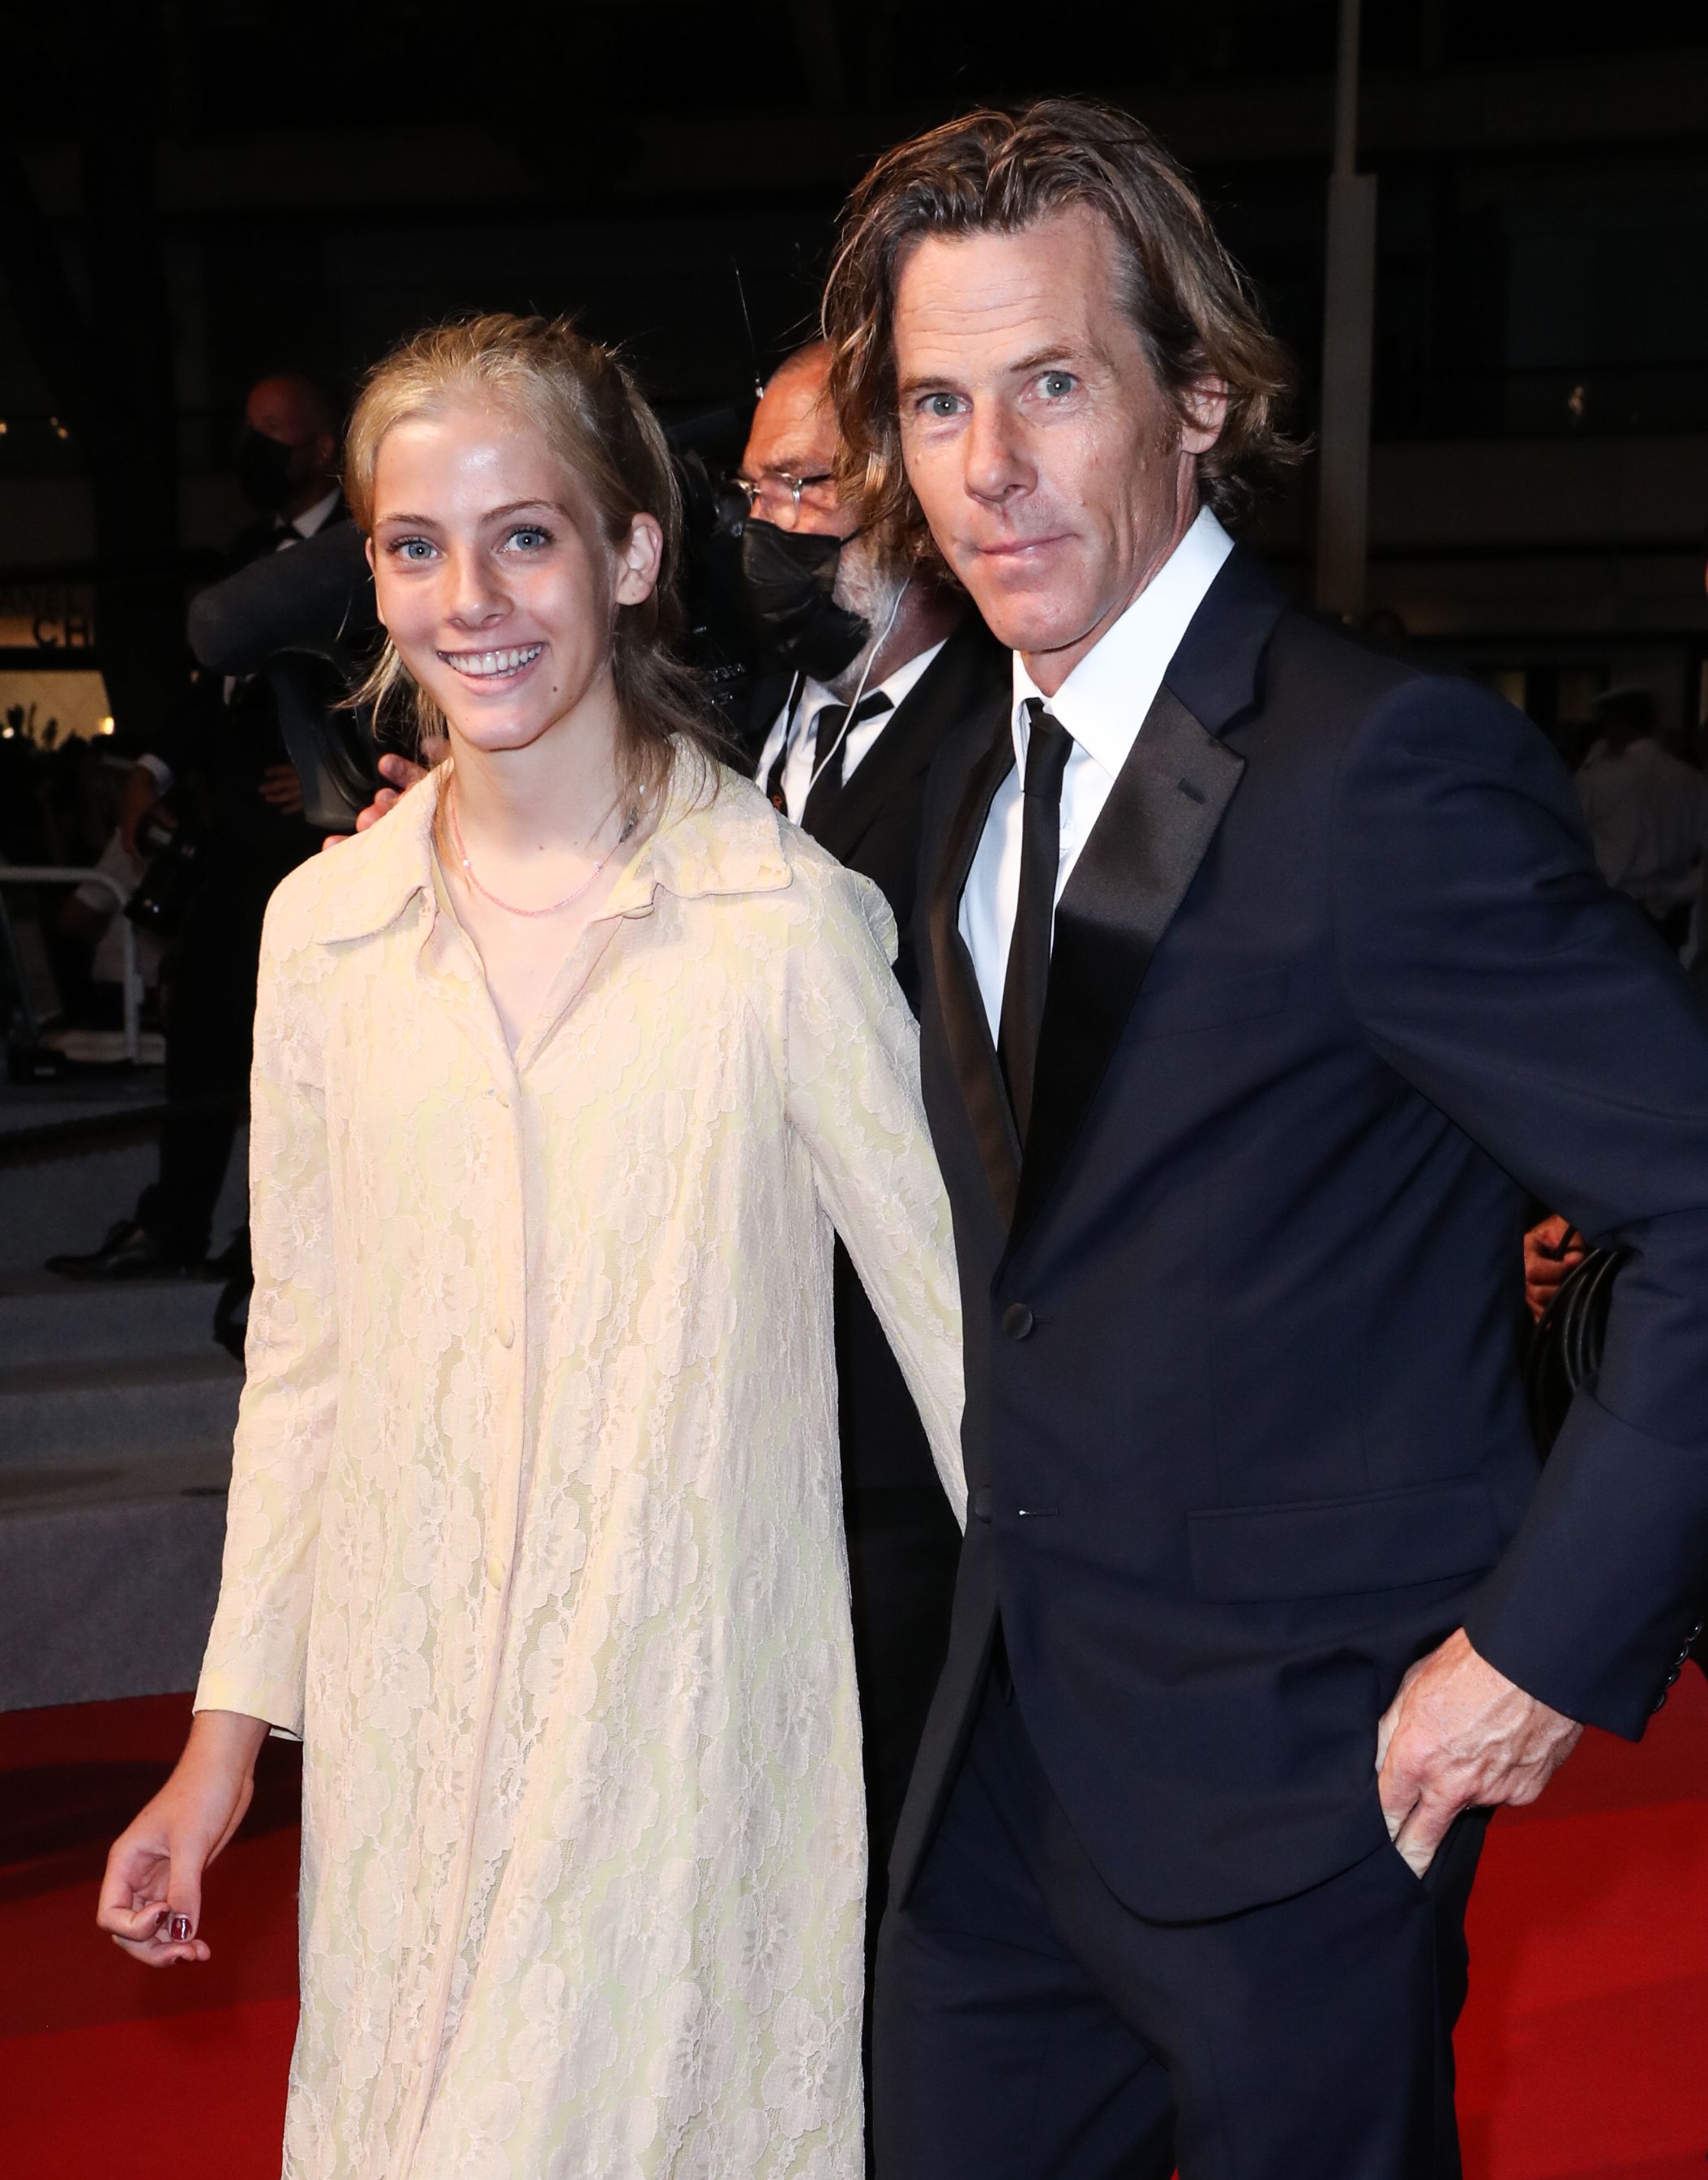 <p>Danny Moder brought daughter Hazel, who was born in 2004, as his date to the premiere of "Flag Day" -- he's the cinematographer on the <a href="https://www.wonderwall.com/celebrity/profiles/overview/sean-penn-398.article">Sean Penn</a> film -- during the <a href="https://www.wonderwall.com/awards-events/cannes-film-festival-2021-see-all-the-hollywood-stars-in-france-473038.gallery">74th Cannes Film Festival</a> in France in July 2021.</p>